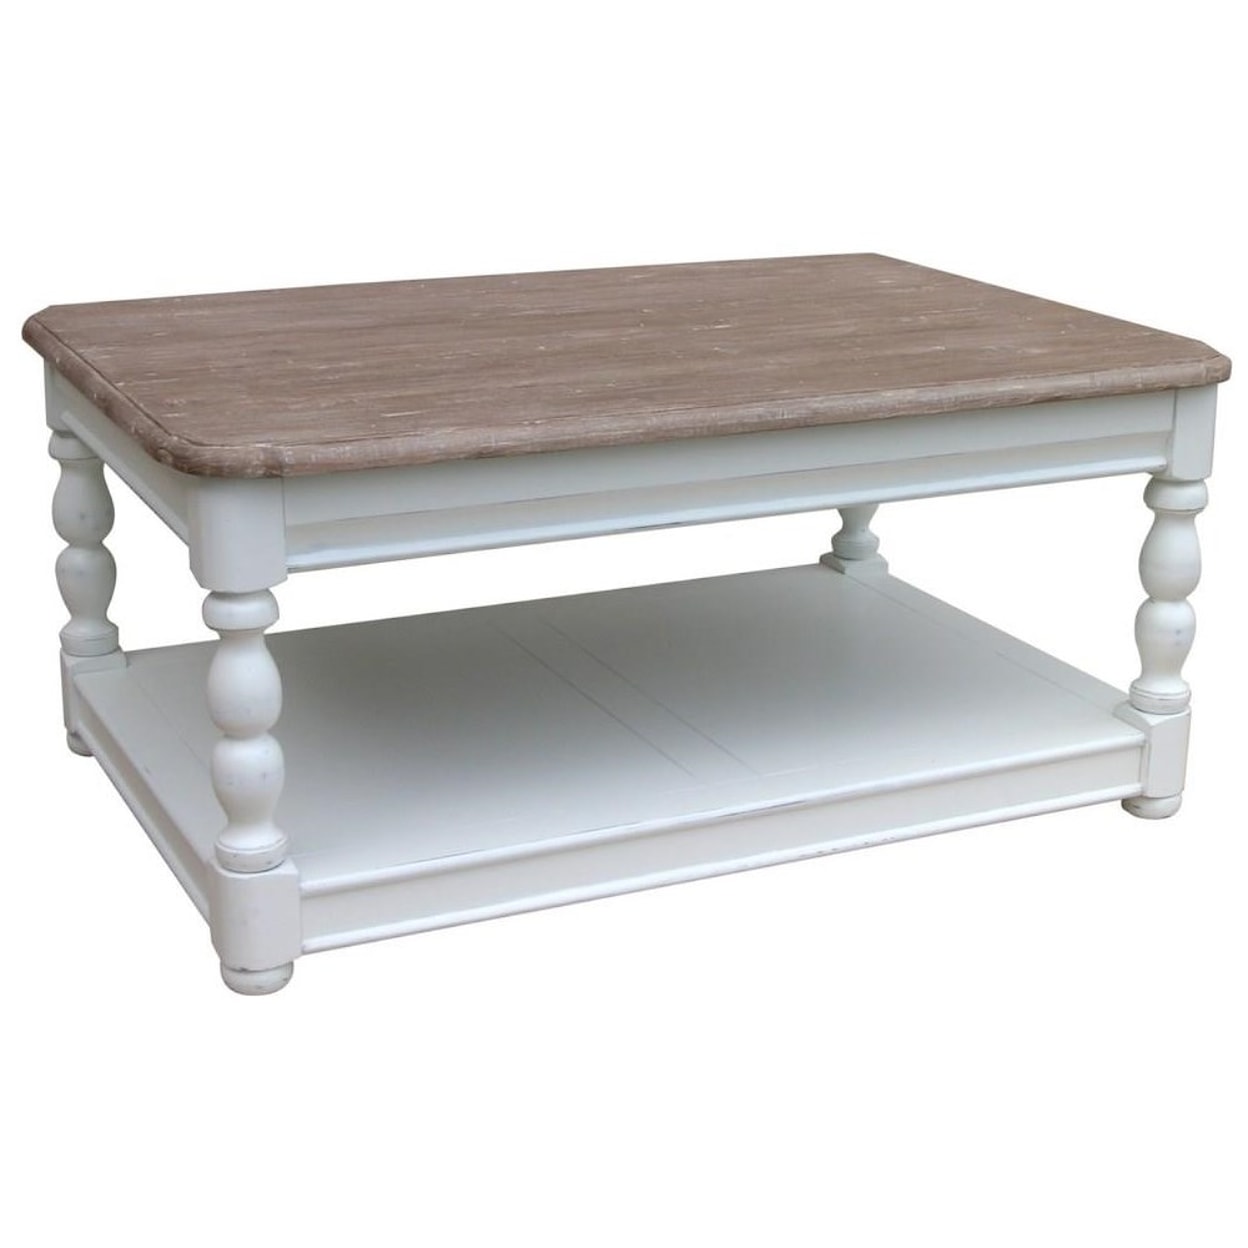 Trade Winds Furniture Occasional Table Groups Newport Coffee Table